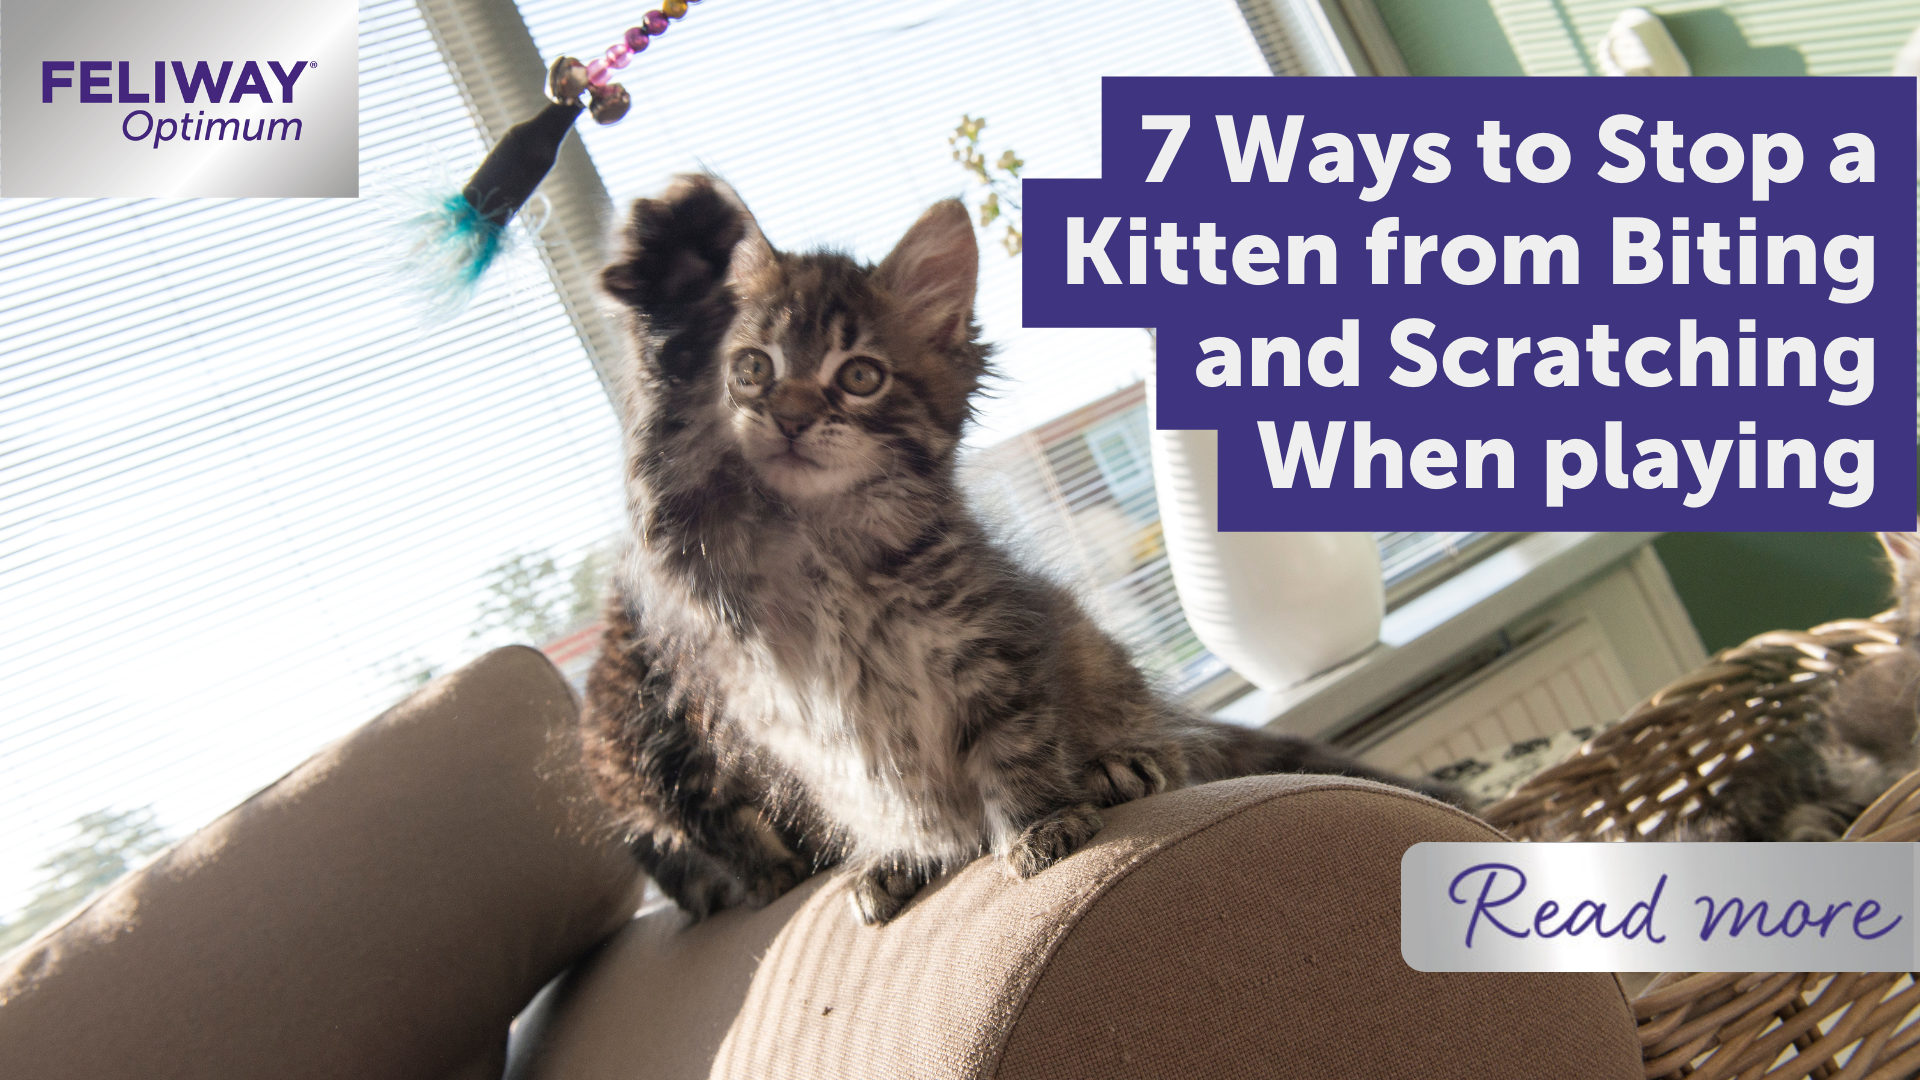 7 Ways to Stop a Kitten from Biting and Scratching when playing